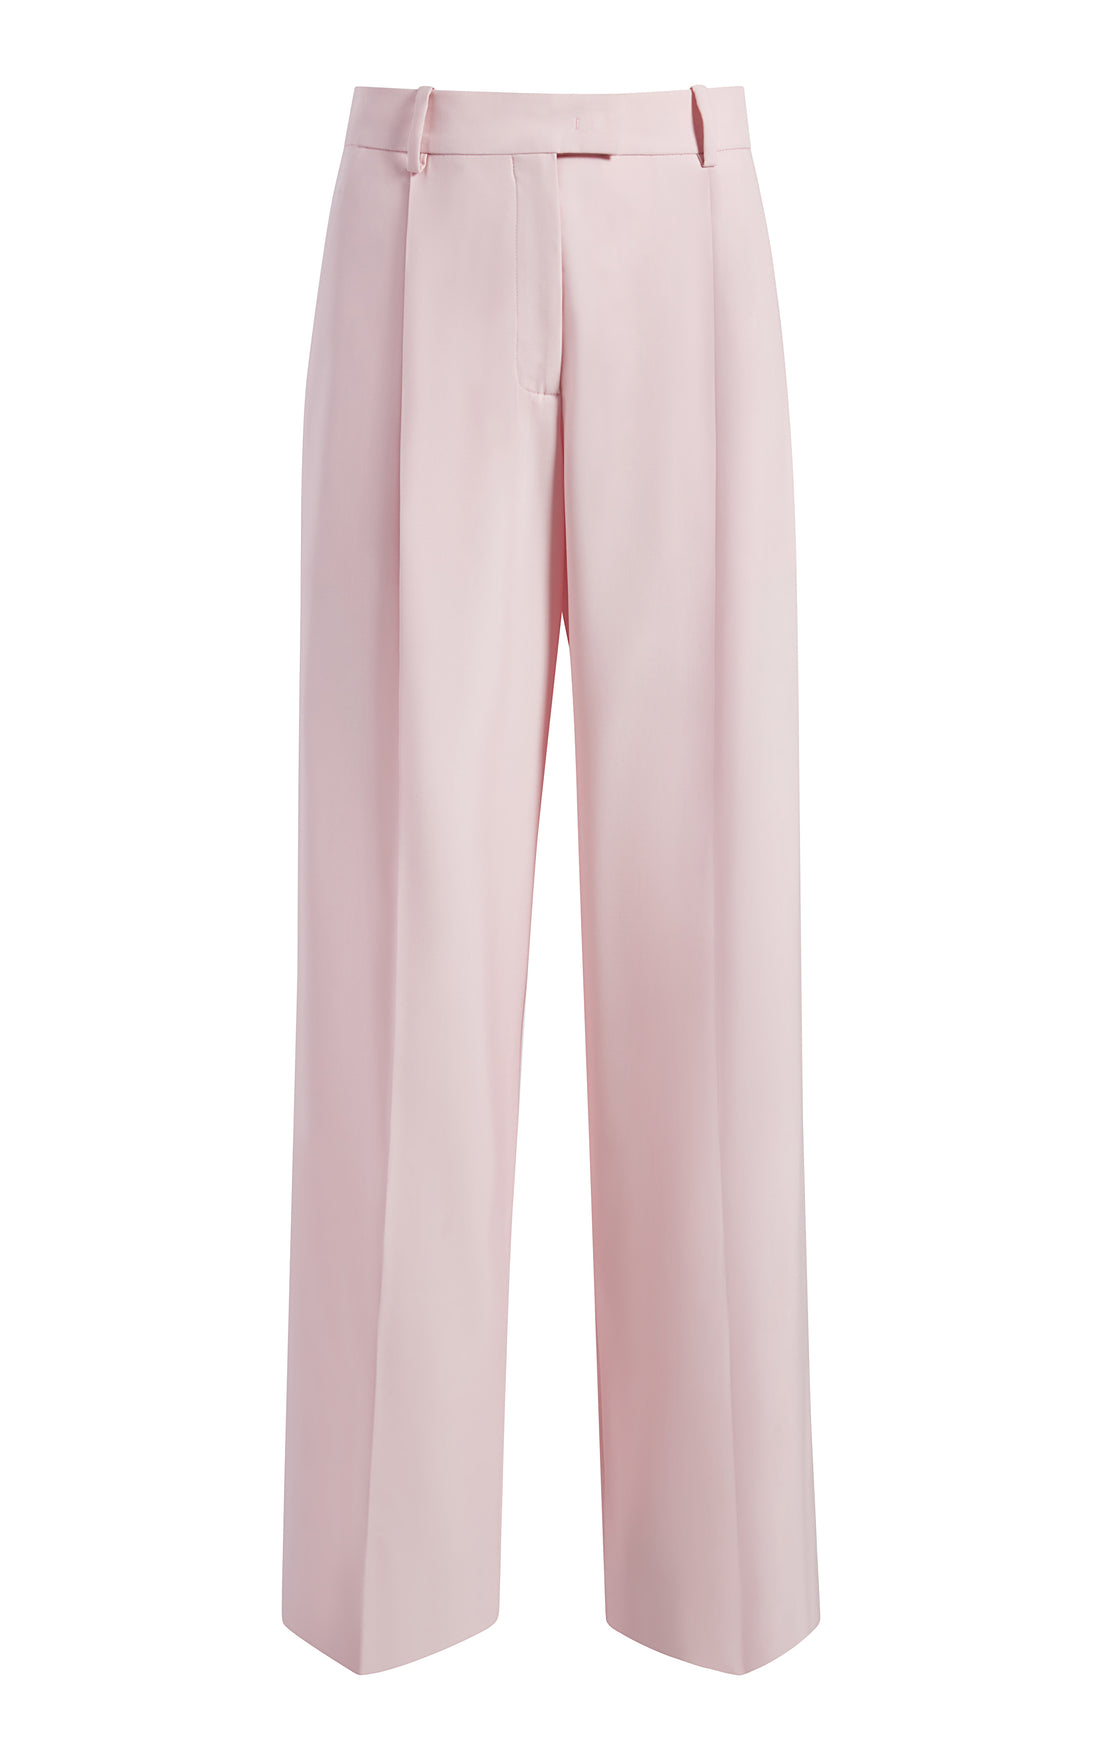 Product image16 with color pale-pink